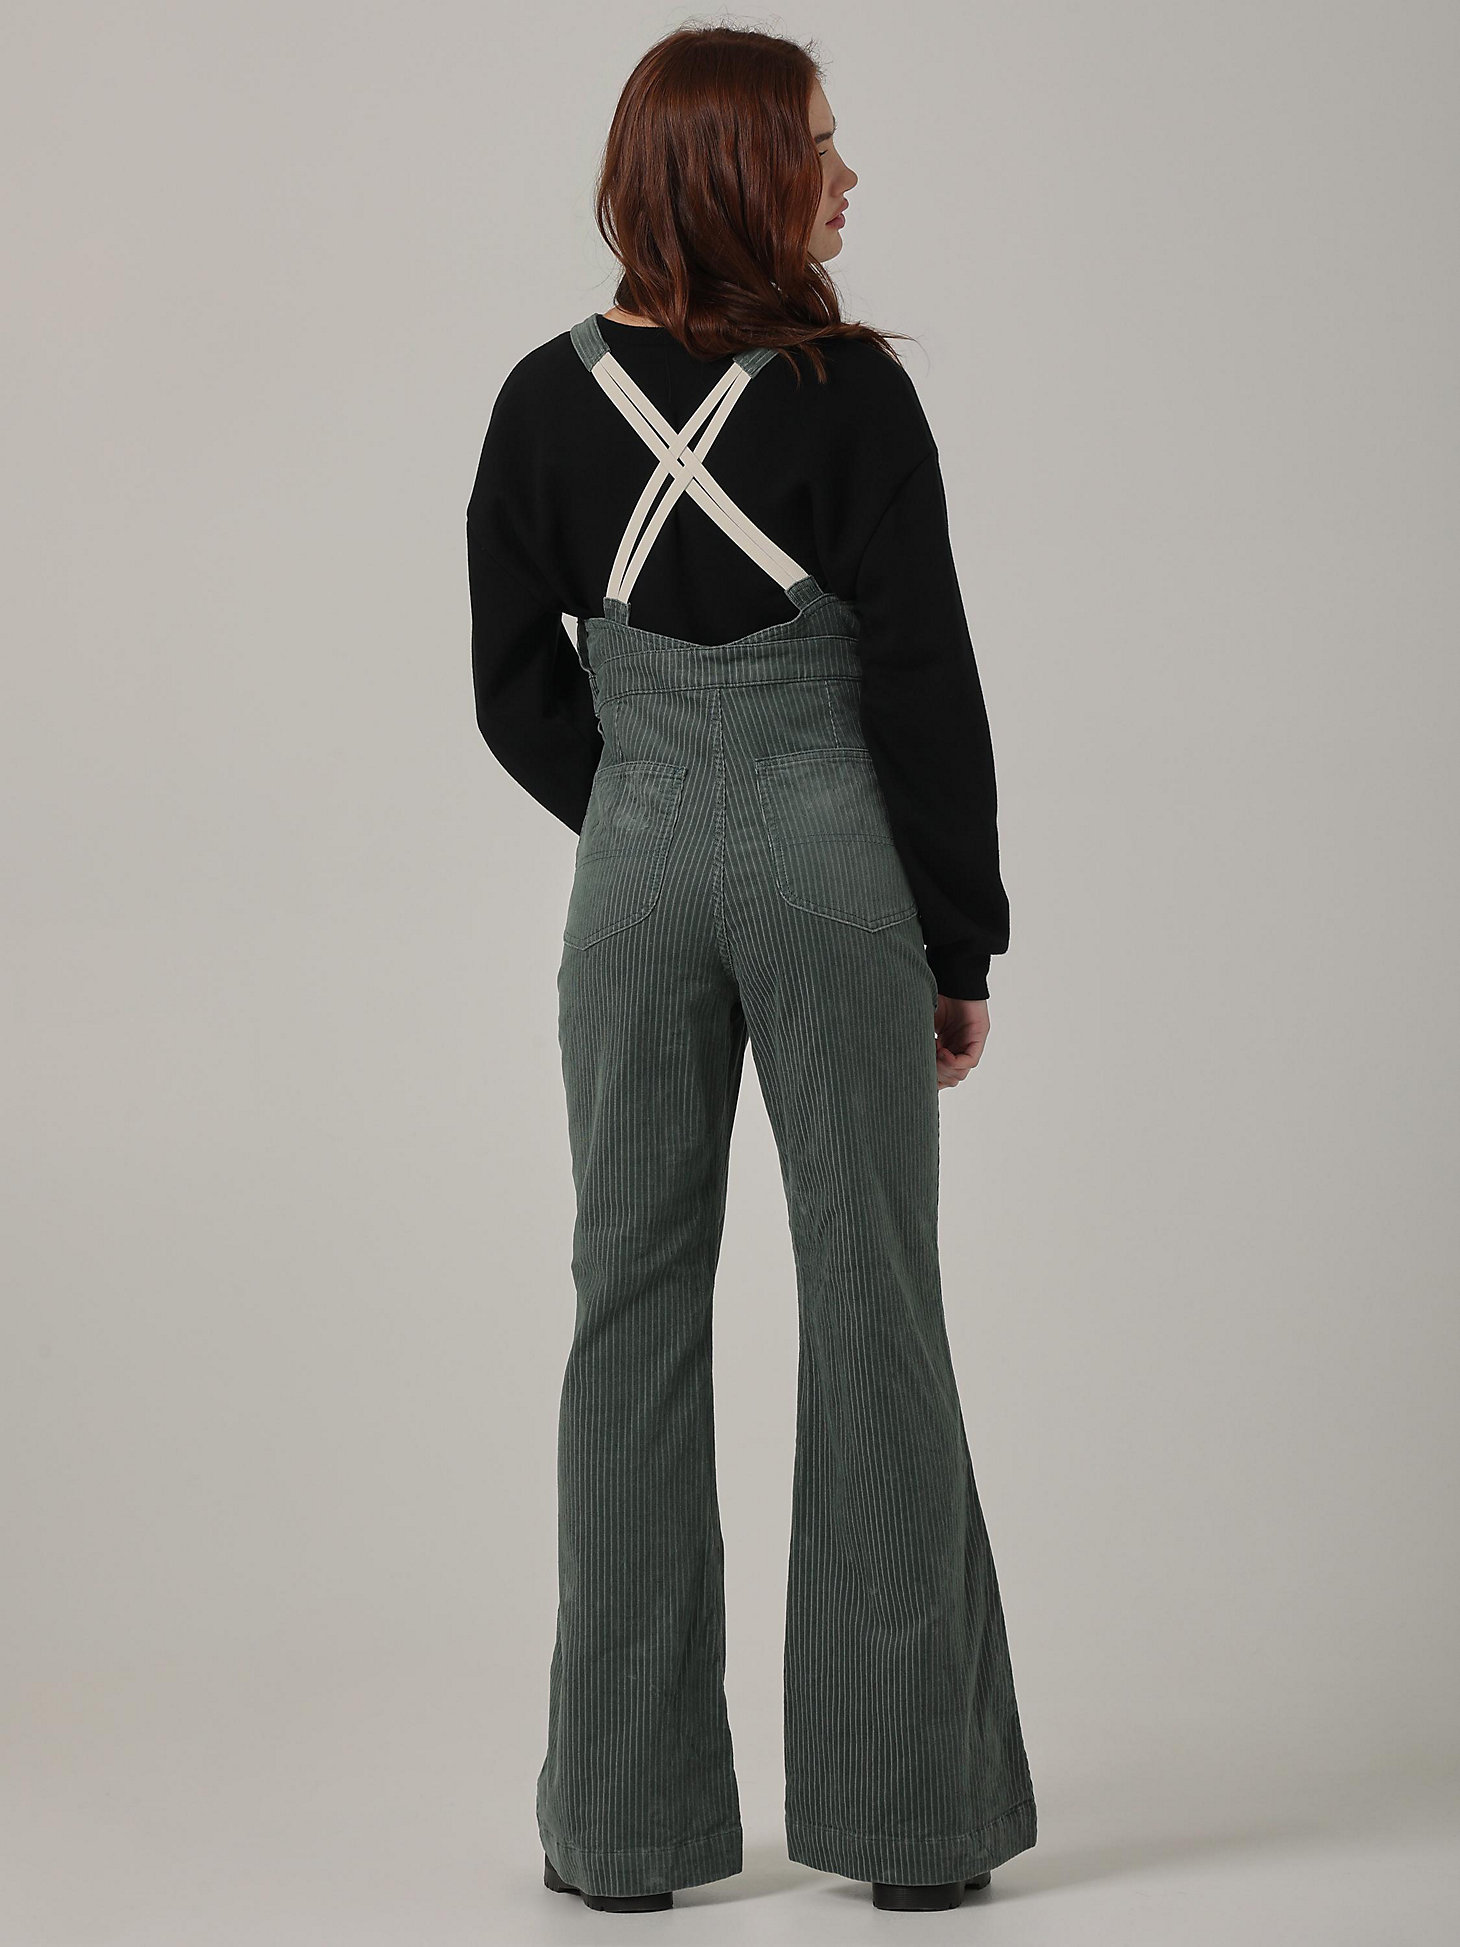 Women's Lee European Collection Factory Flare Overall in Fort Green alternative view 1